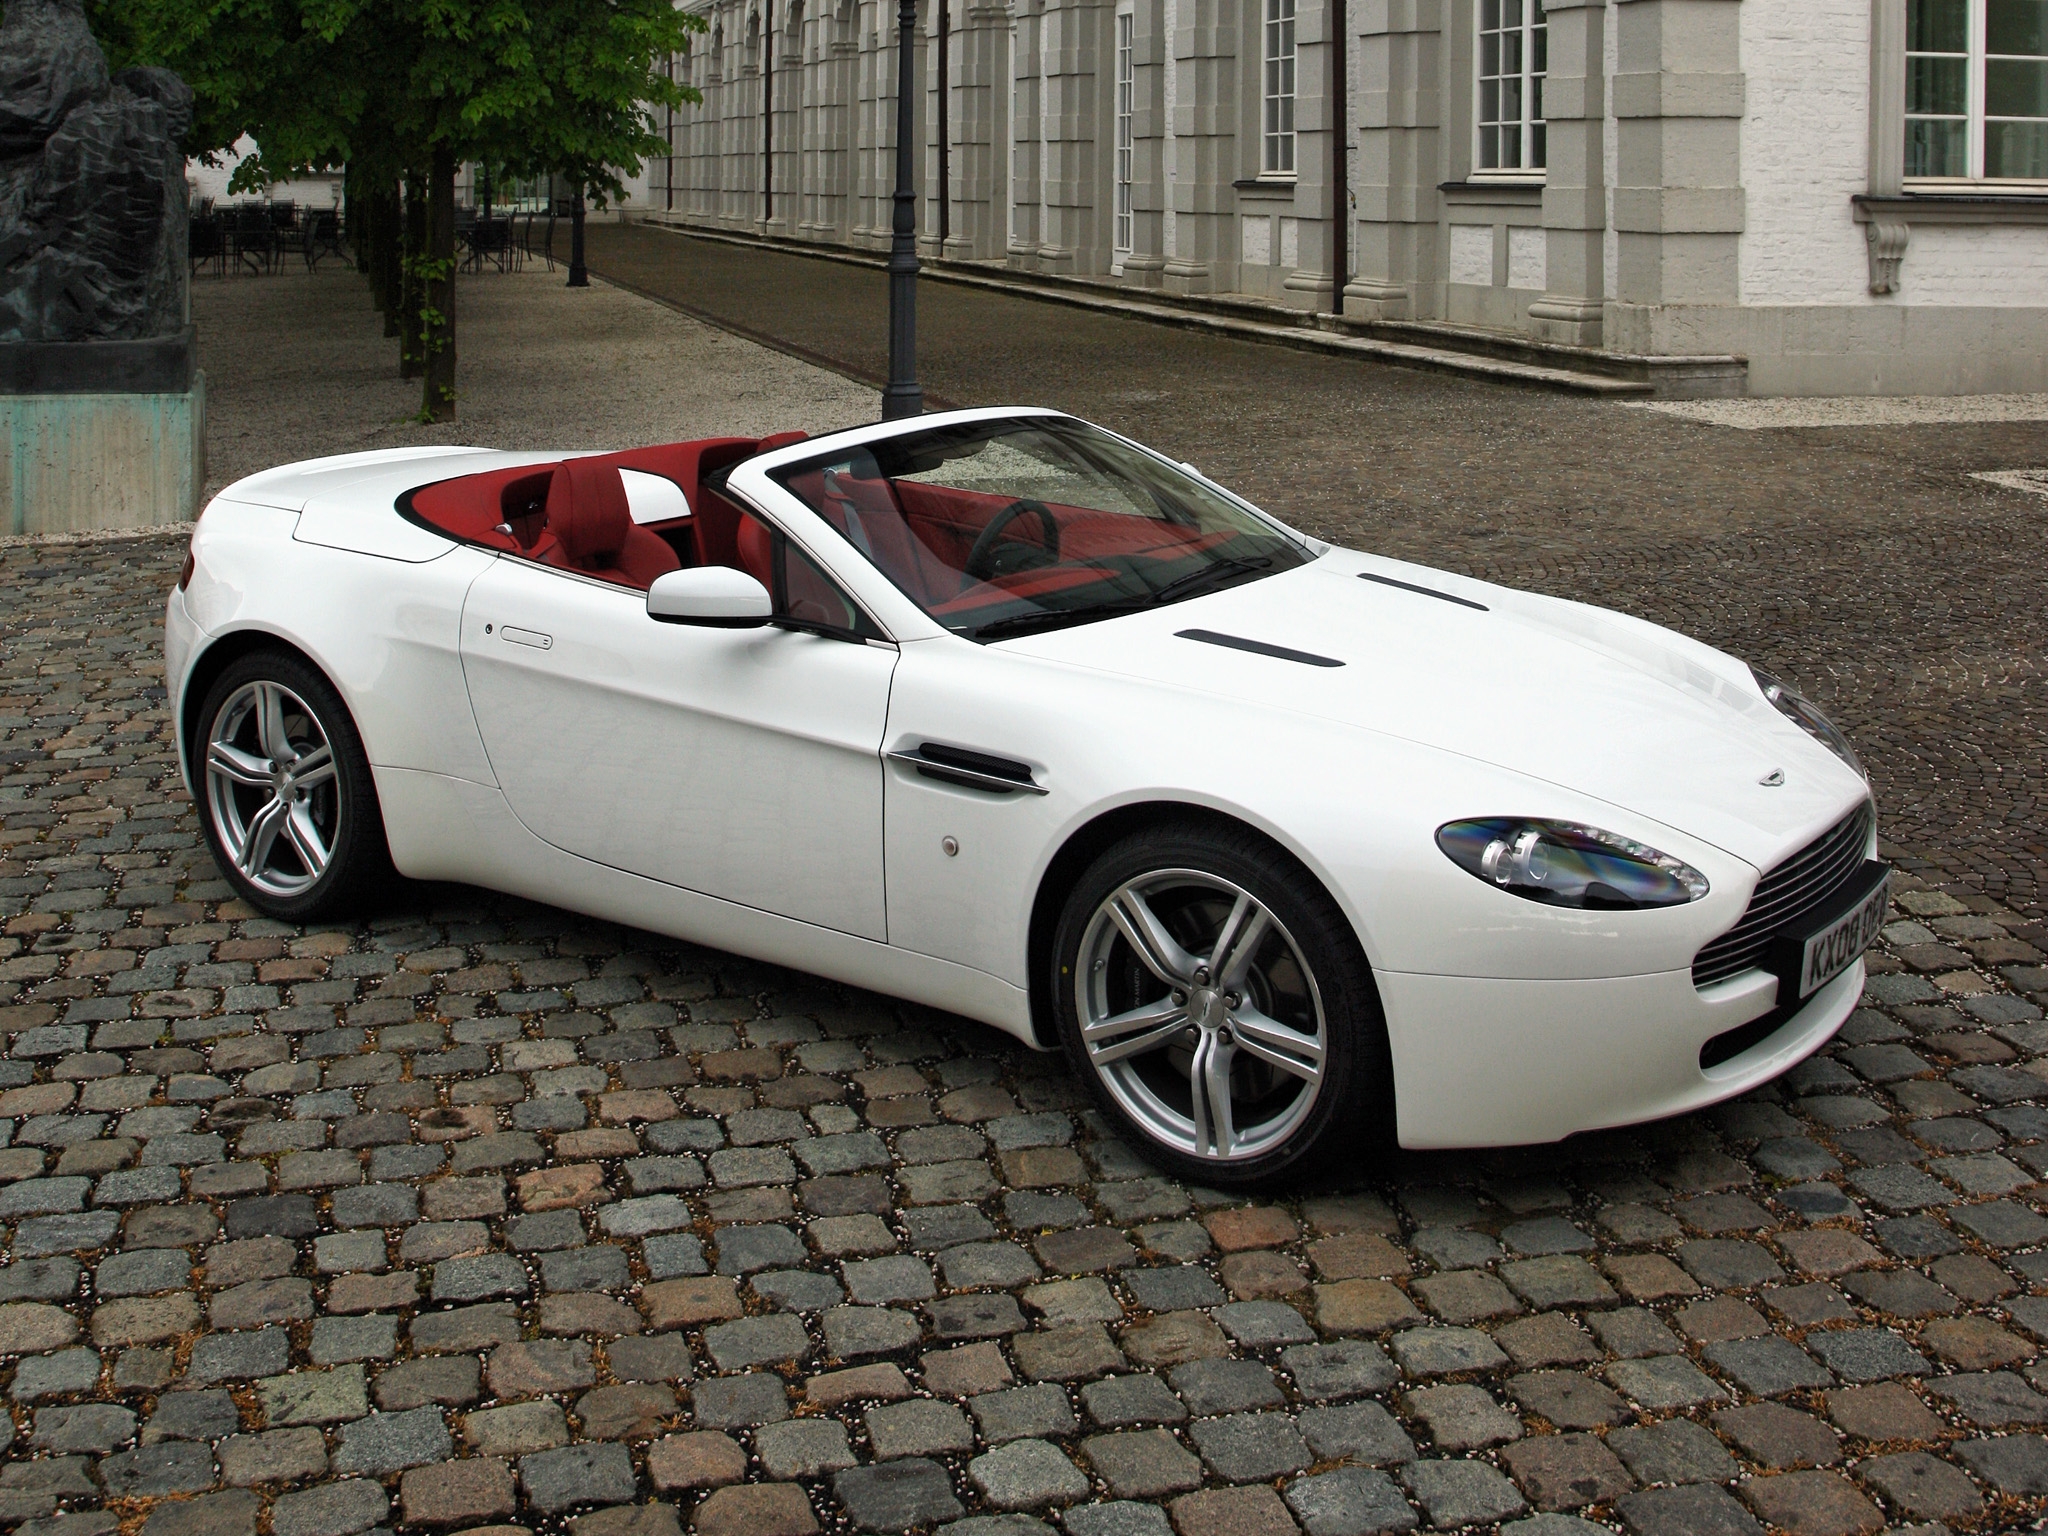 v8, aston martin, cars, white, side view, style, cabriolet, 2008, street, vantage for android